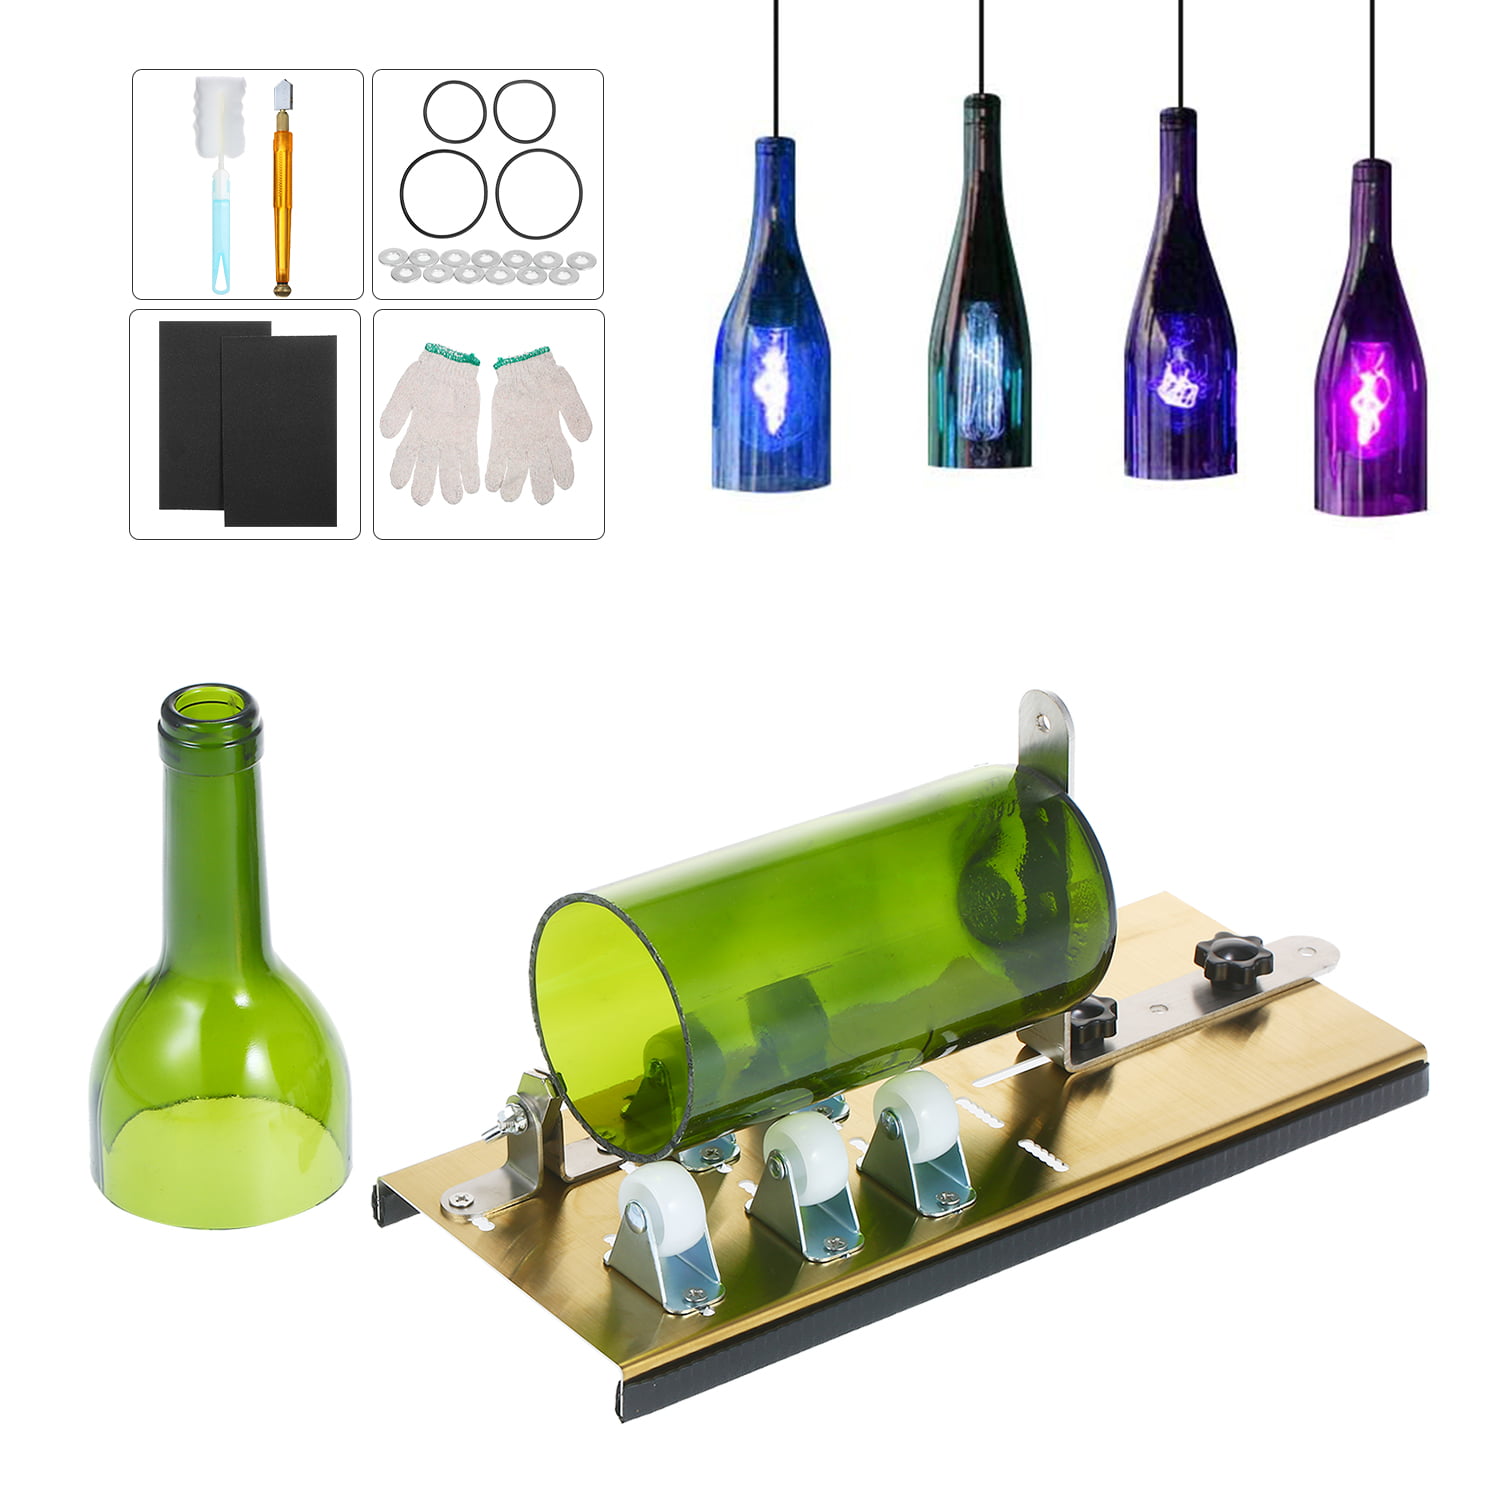 YLYL 19 Pcs Glass Bottle Cutter & Glass Cutter Kit DIY Tools, Glass Cutter  for Bottles, Upgraded Wine Bottle Cutters for Cutting Round Bottles, with  Glass Cutter, Gloves, Sanding Paper, Hemp Rope